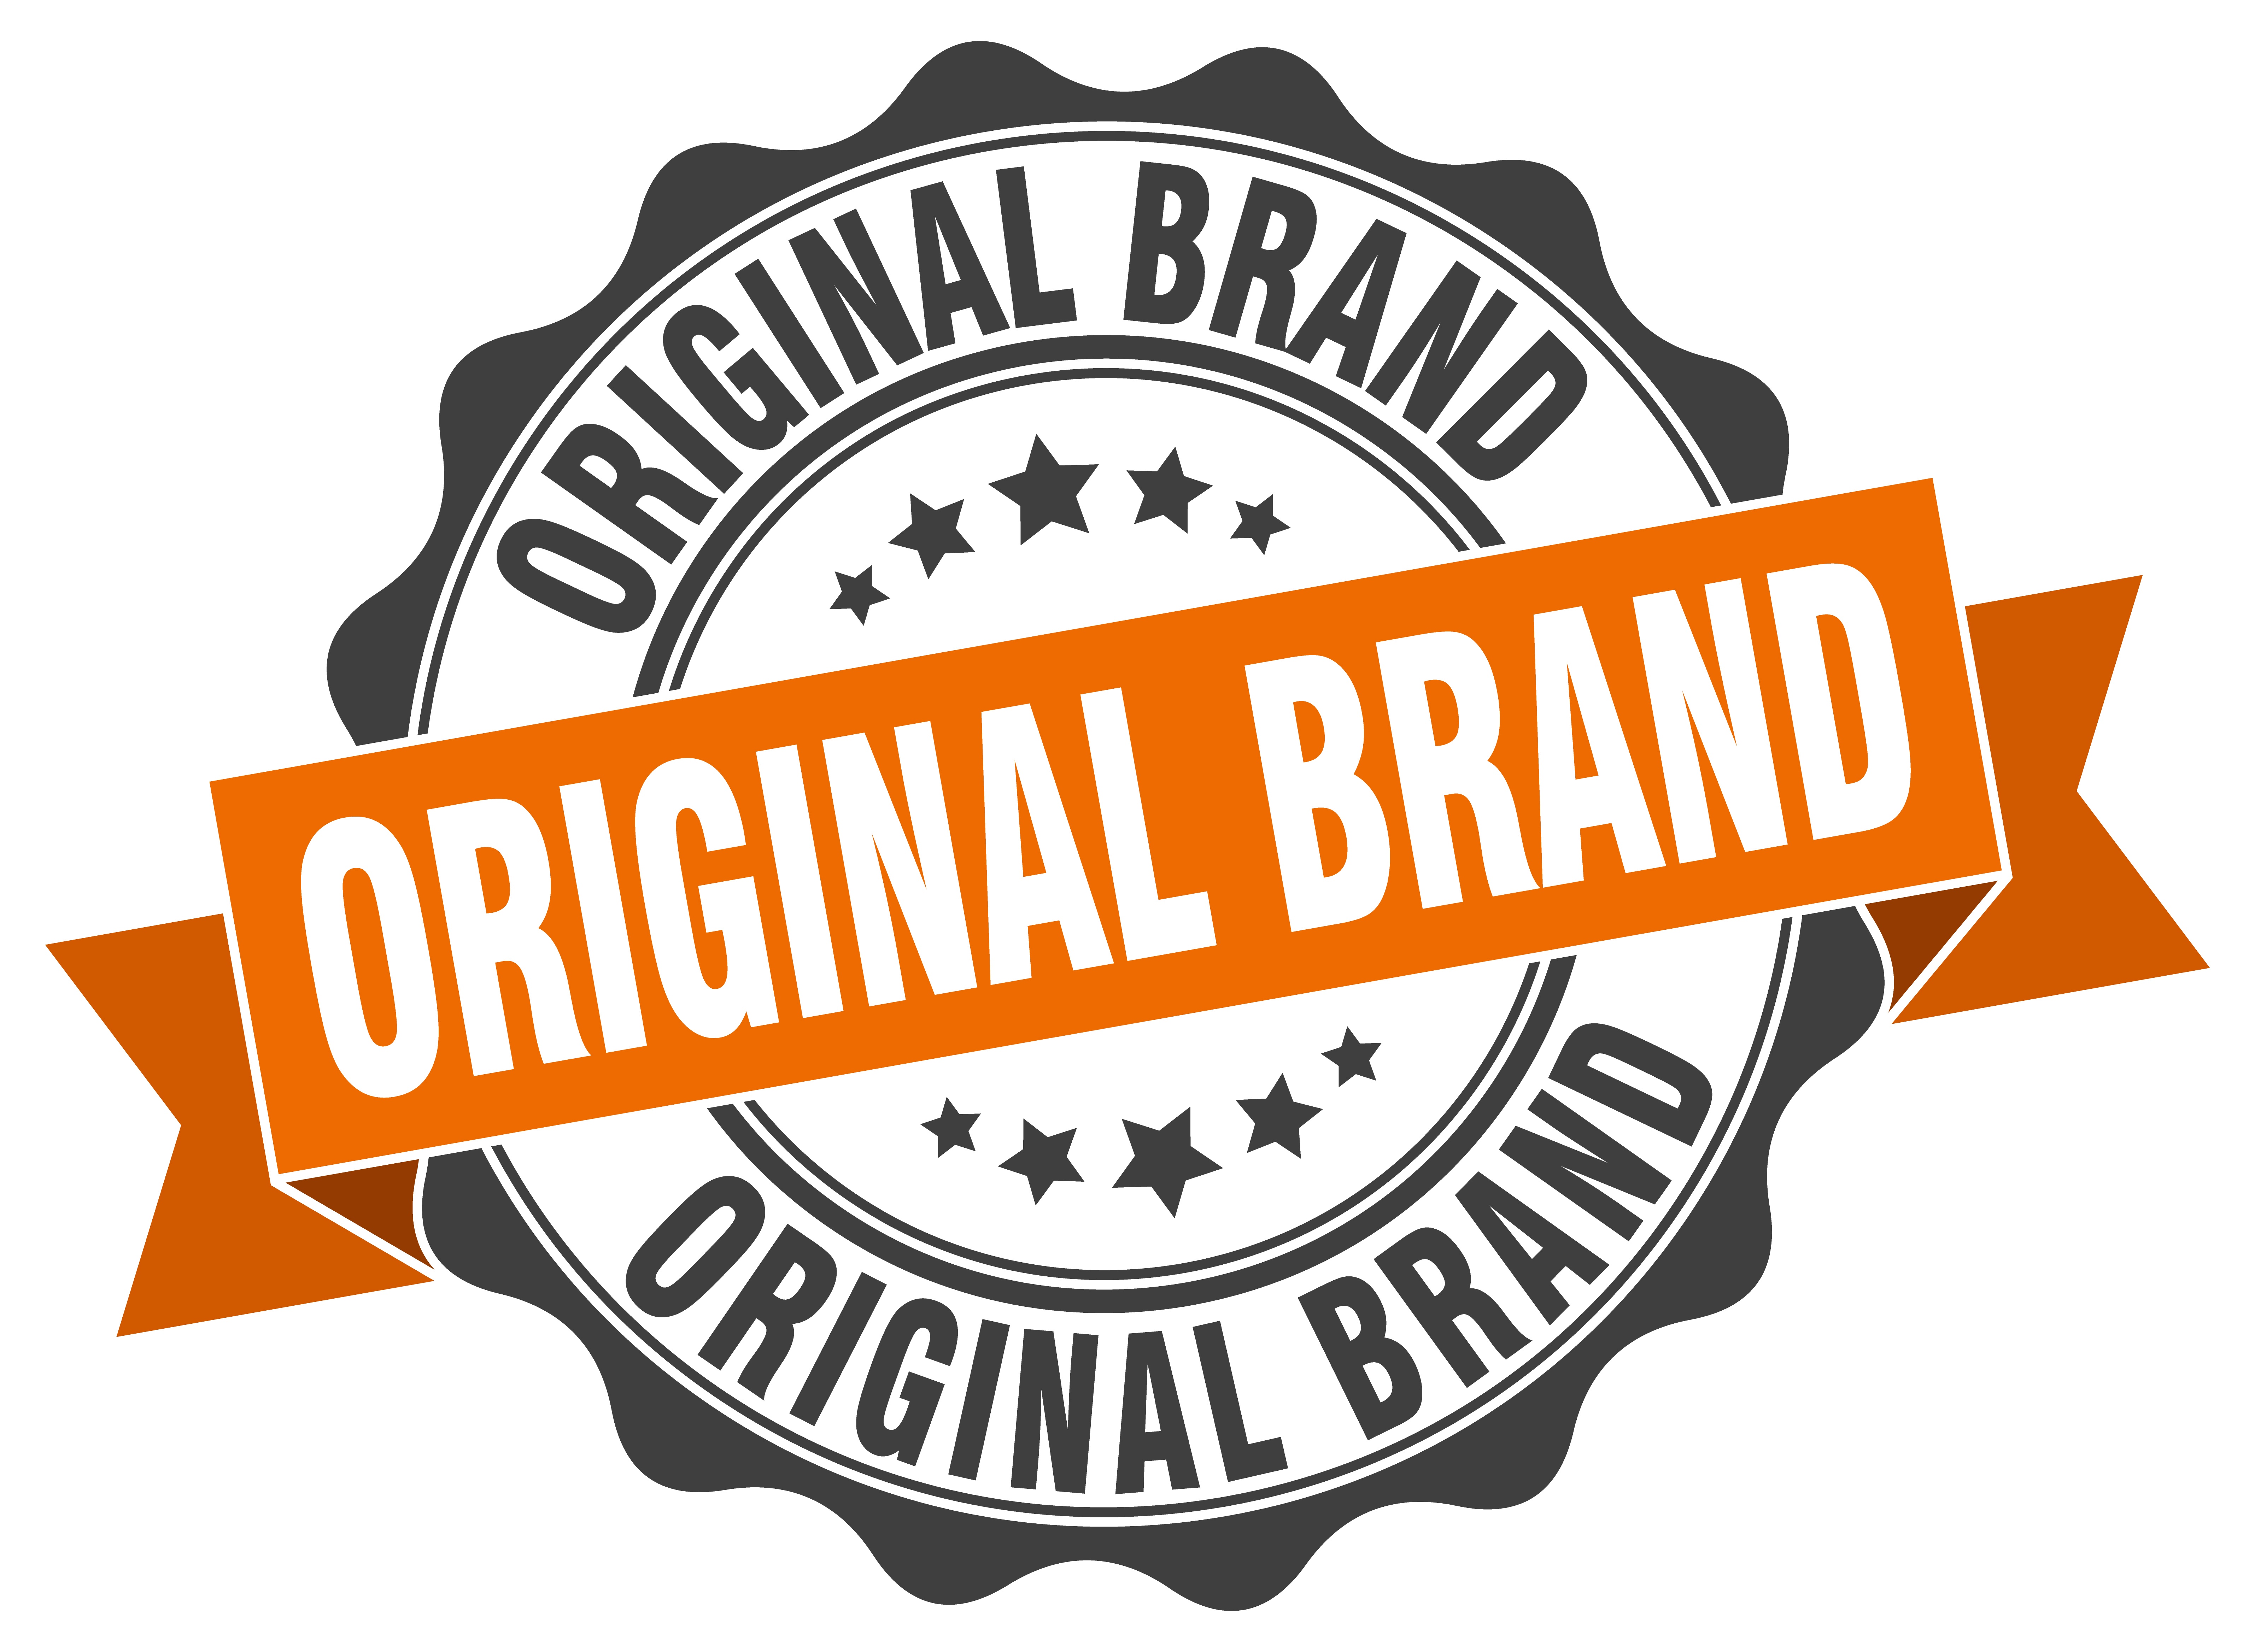 A circular sign that repeats the words 'Original Brand' three times. The words are written in gray and white, an orange banner flies across the center, there are two groupings of gray stars.